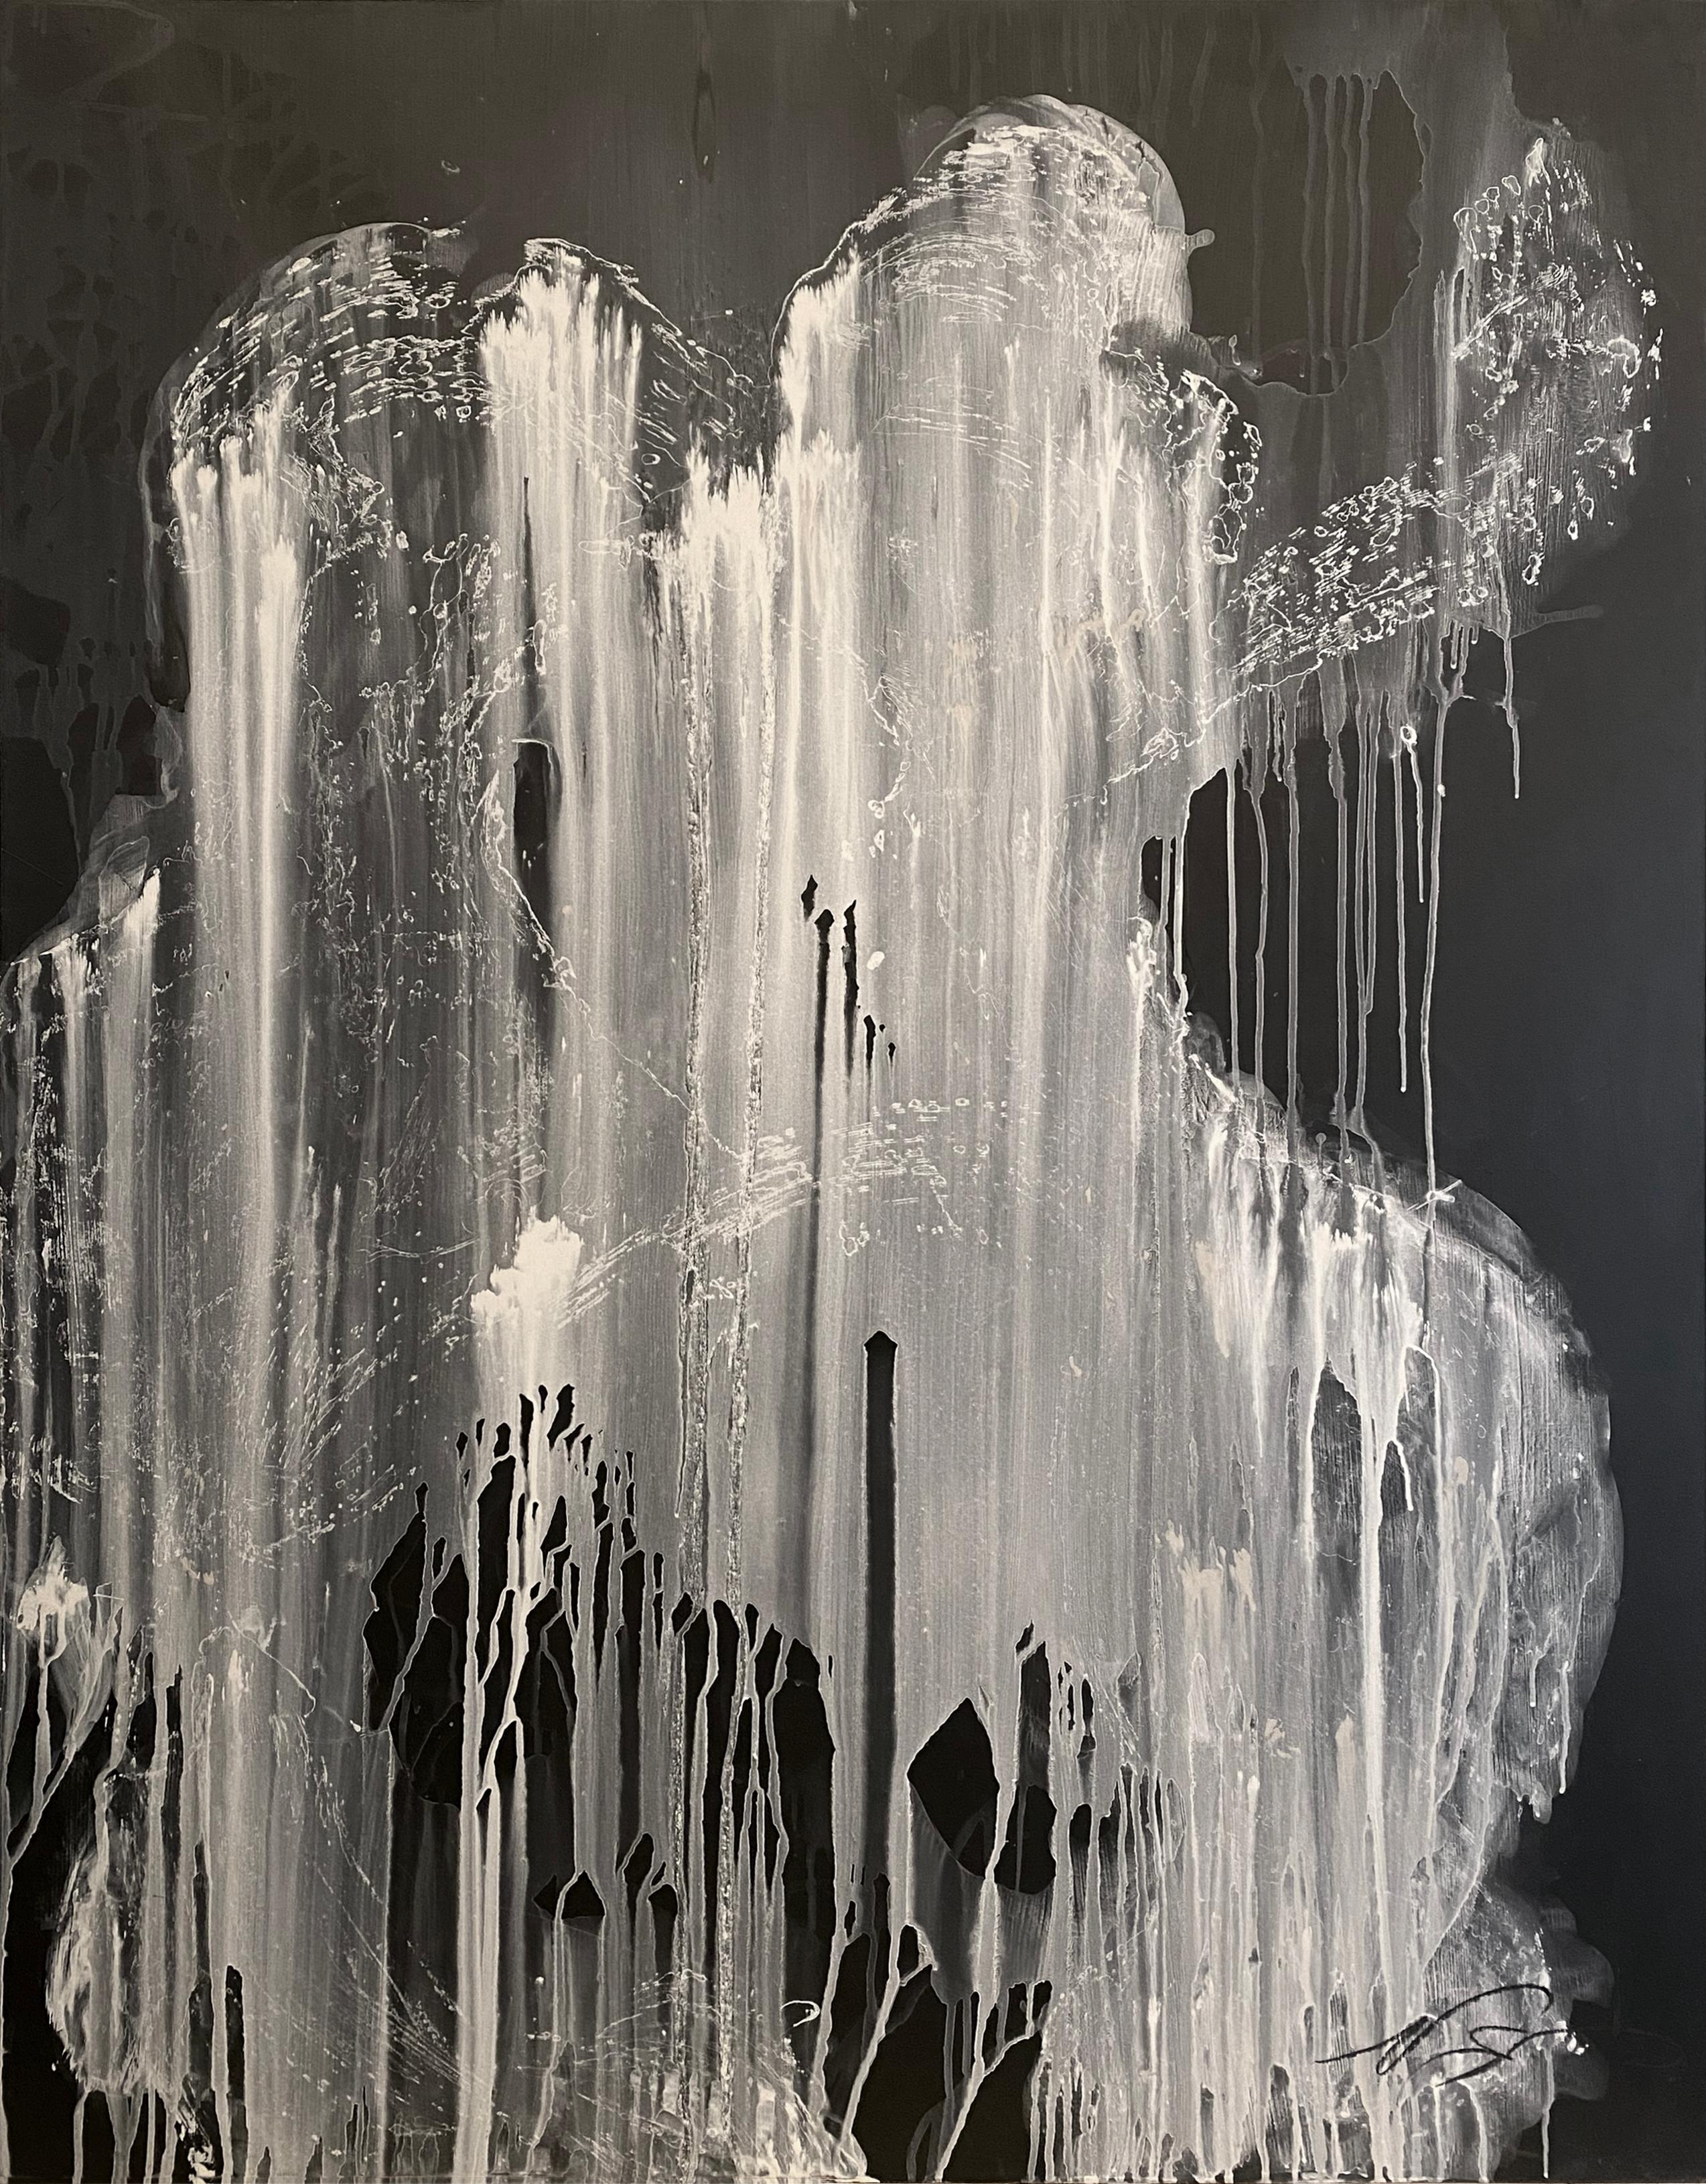 Nicholas Evans Abstract Painting - "Deluge” (Black and White Drips, High Contrast, Abstract, Large Format Painting)